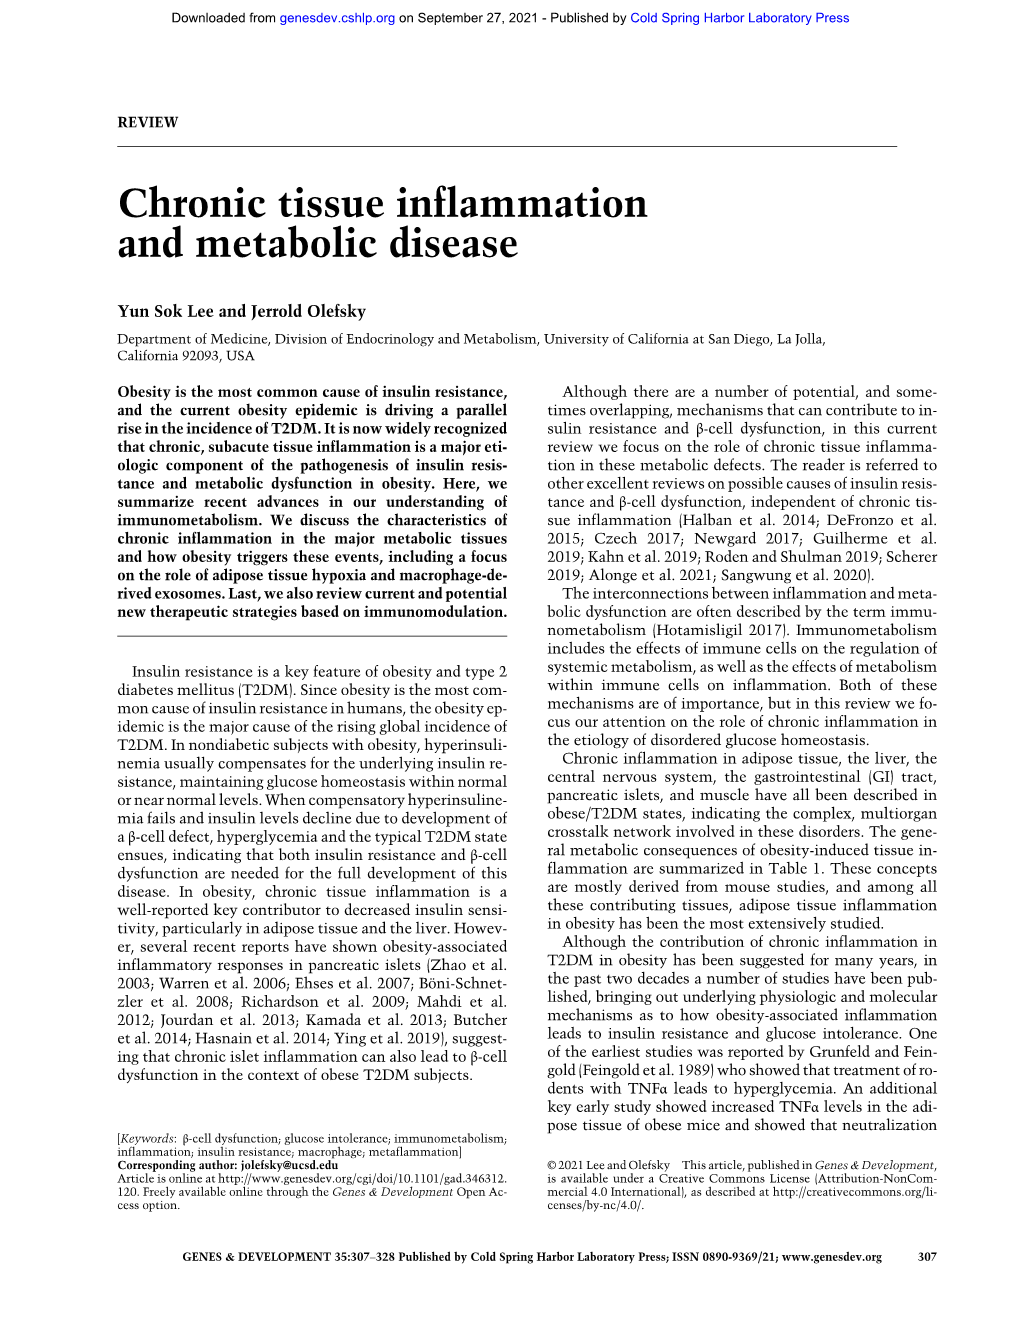 Chronic Tissue Inflammation and Metabolic Disease